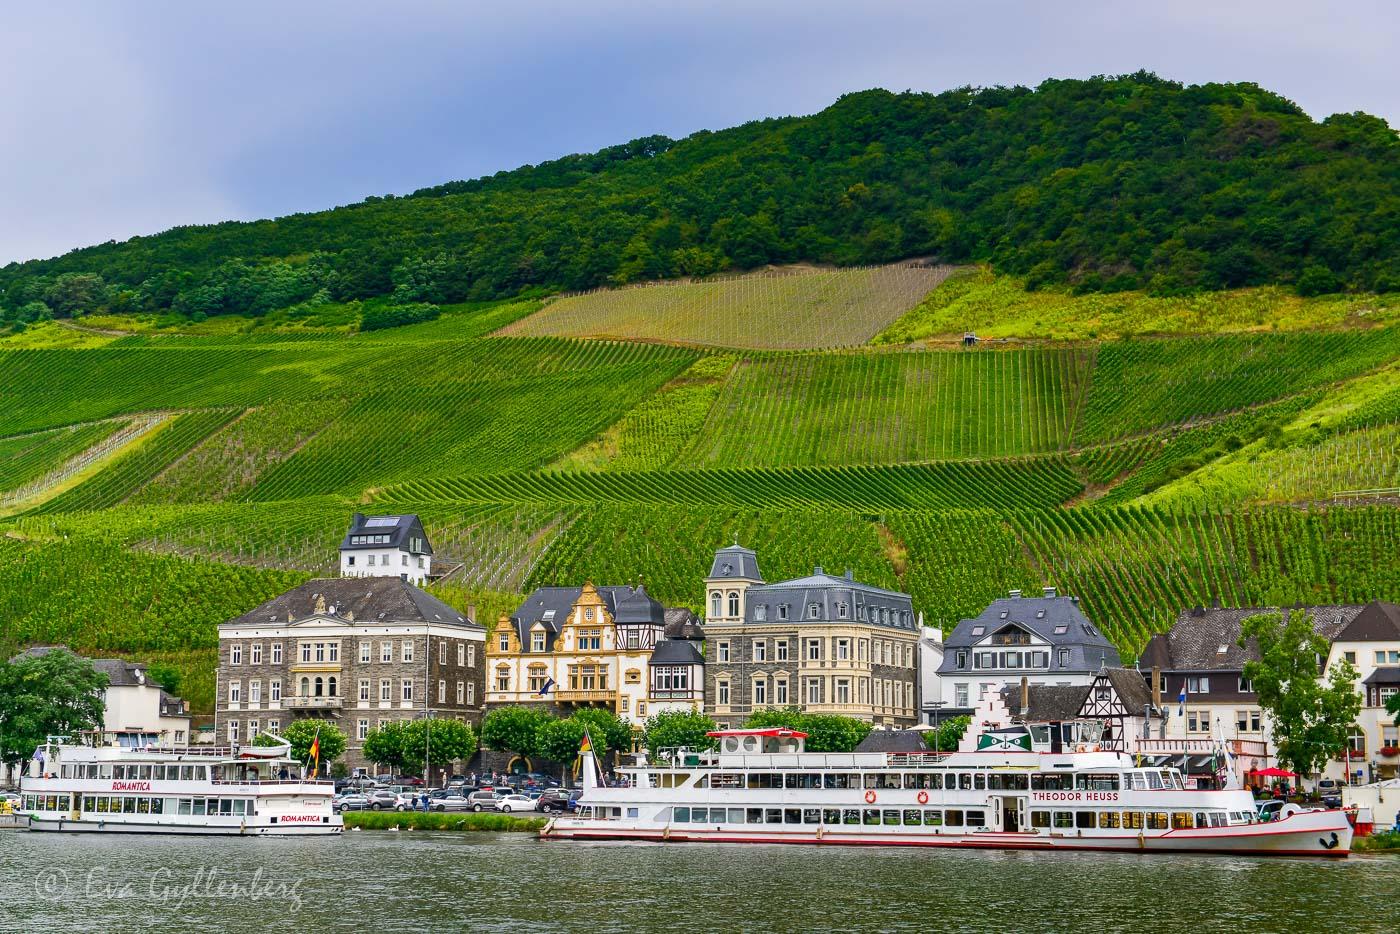 Cruise boats and vineyards in the Mosel Valley